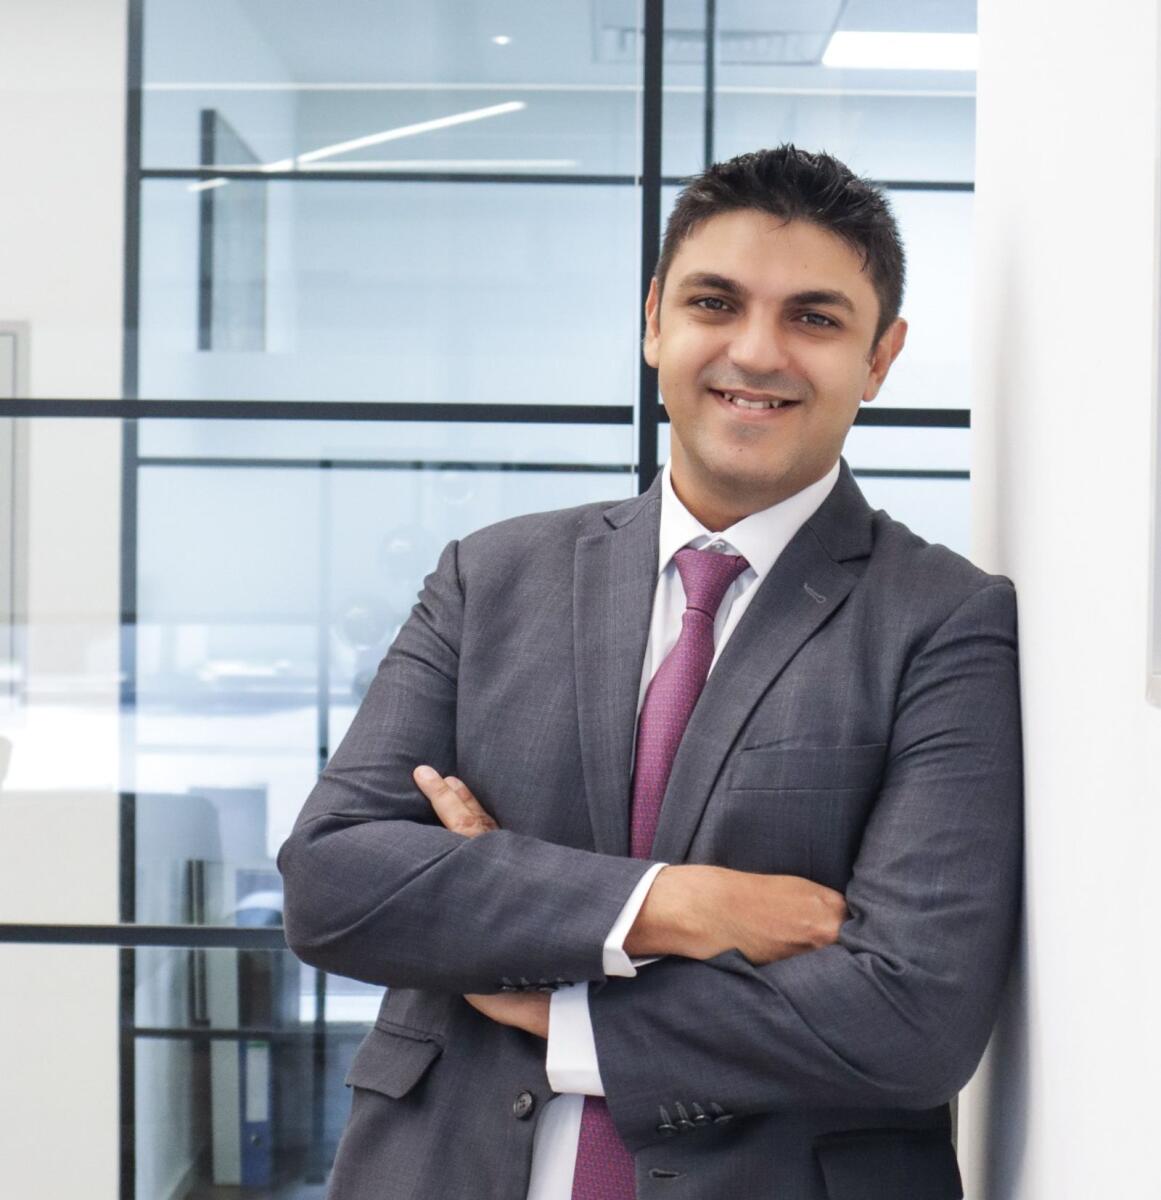 Vijay Valecha, Chief Investment Officer at Century Financial, said Türkiye has emerged as the fastest-growing among the UAE's top 10 trade partners.